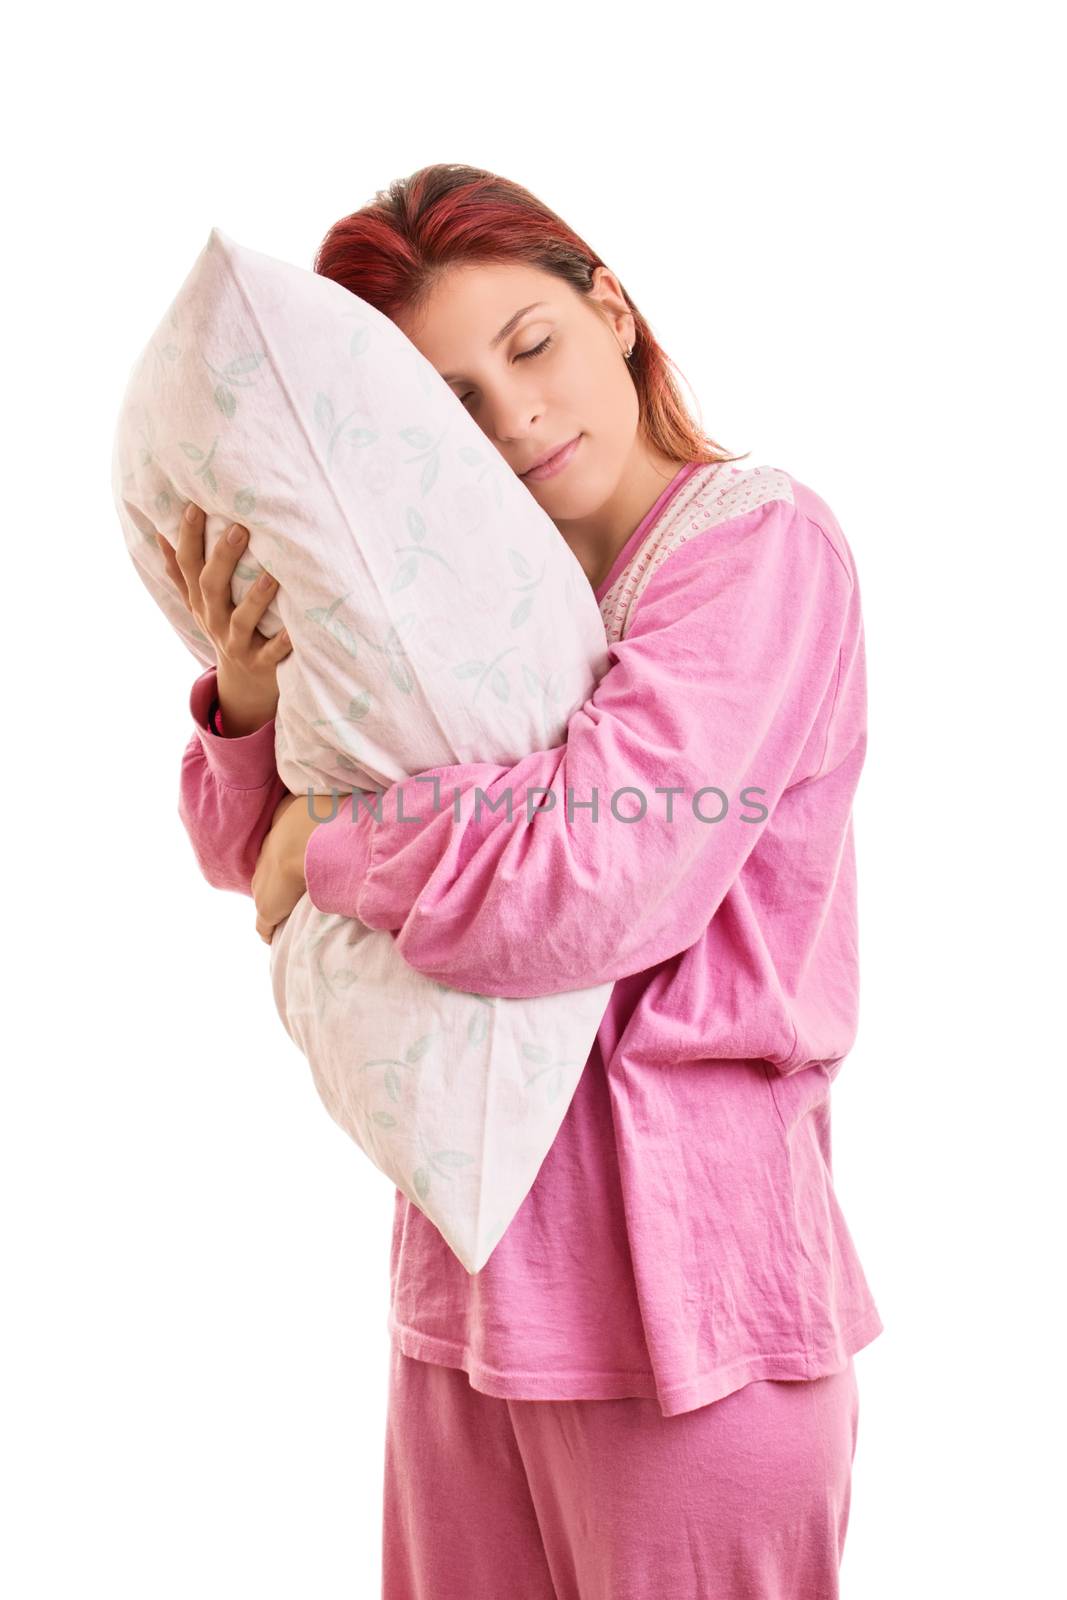 My comfortable pillow. Beautiful young girl in pink pajamas with closed eyes hugging a pillow, isolated on white background.